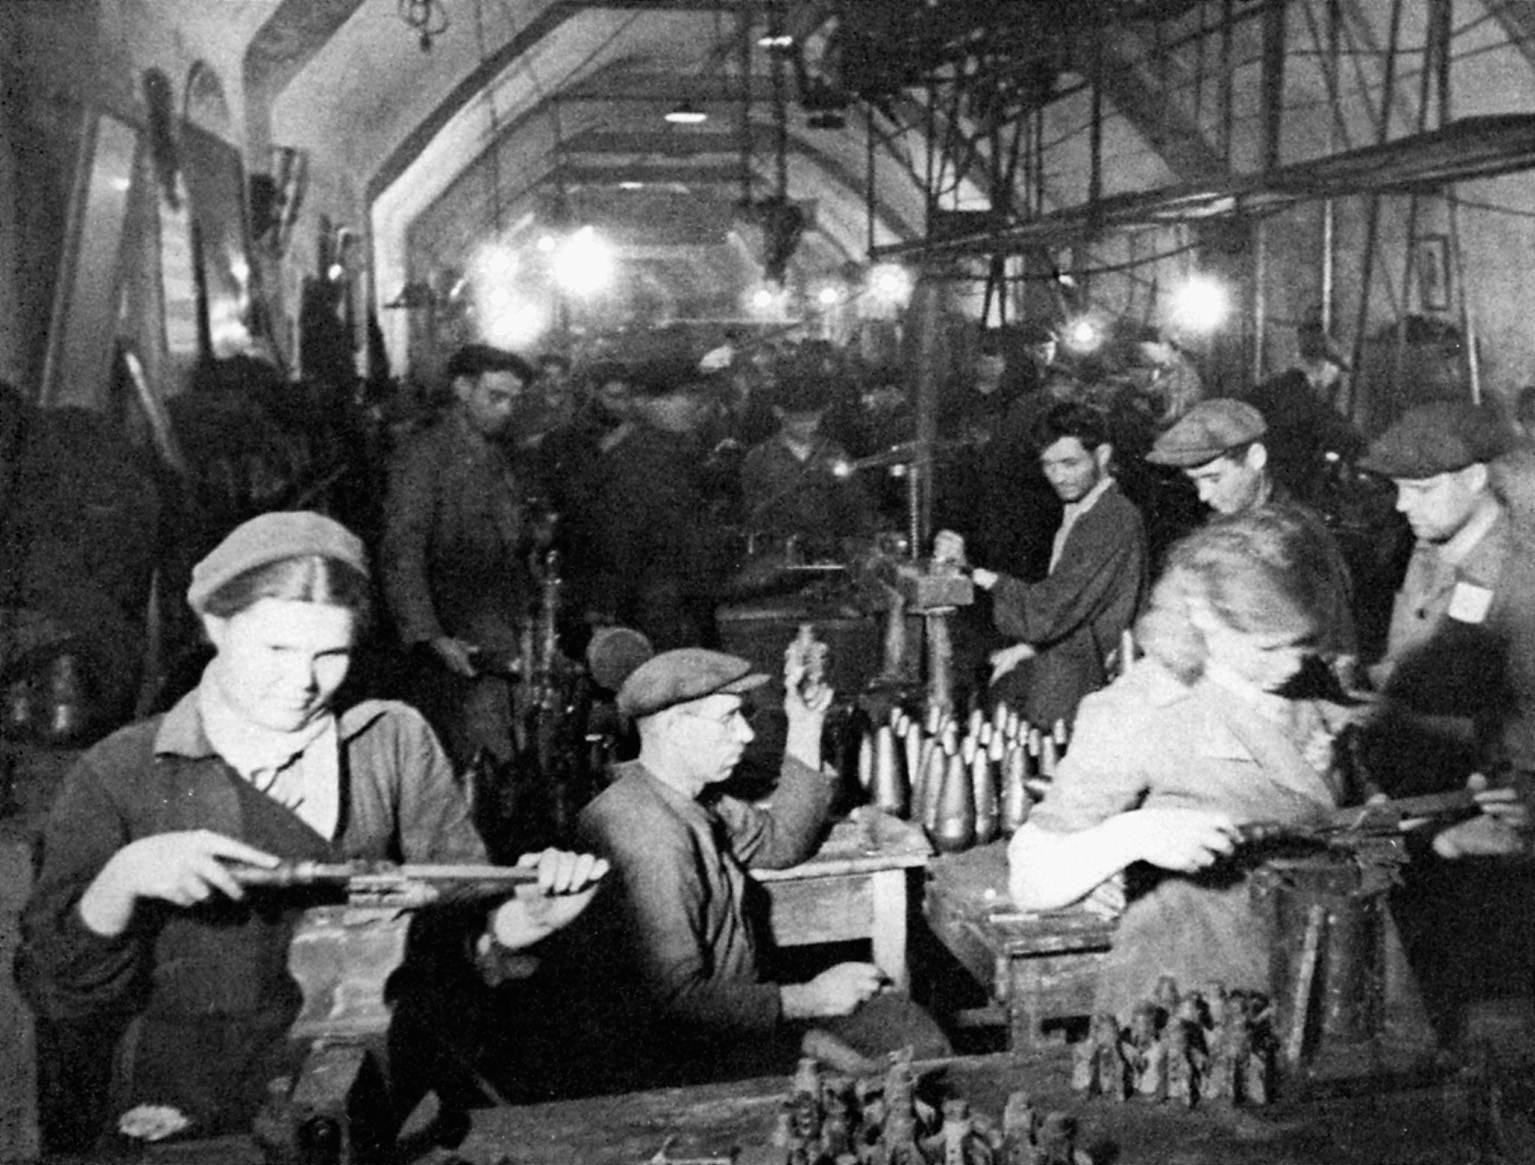 Toiling away in an underground shelter lit by bare lightbulbs, citizens of Sevastopol work overtime to aid in the defense effort. 